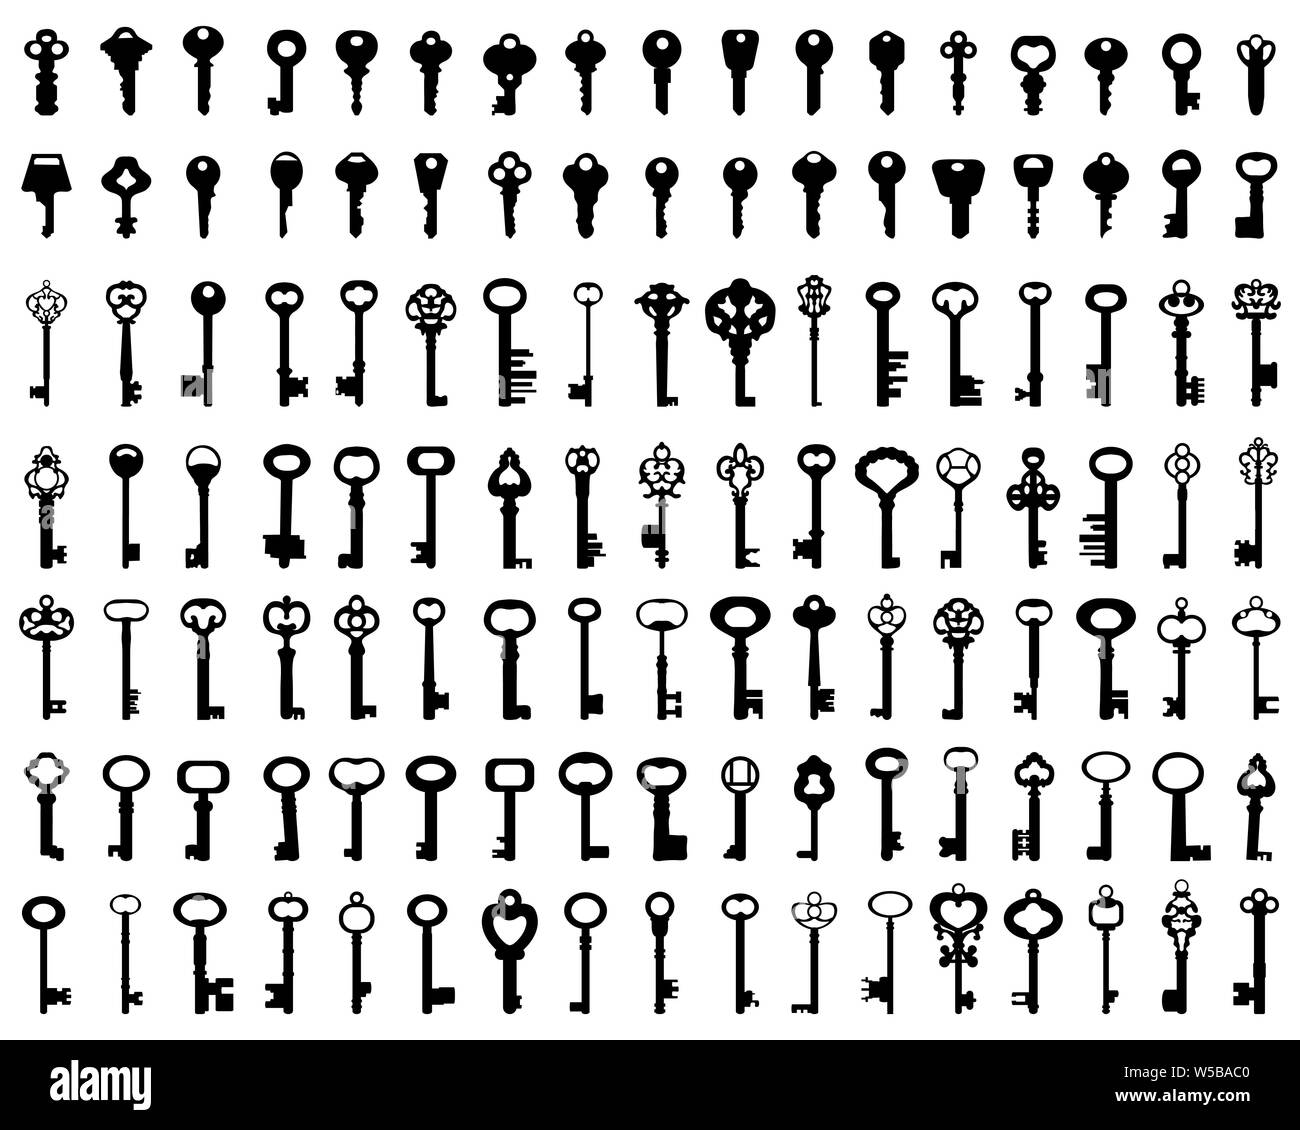 Set of black silhouettes of door keys on a white background Stock Photo